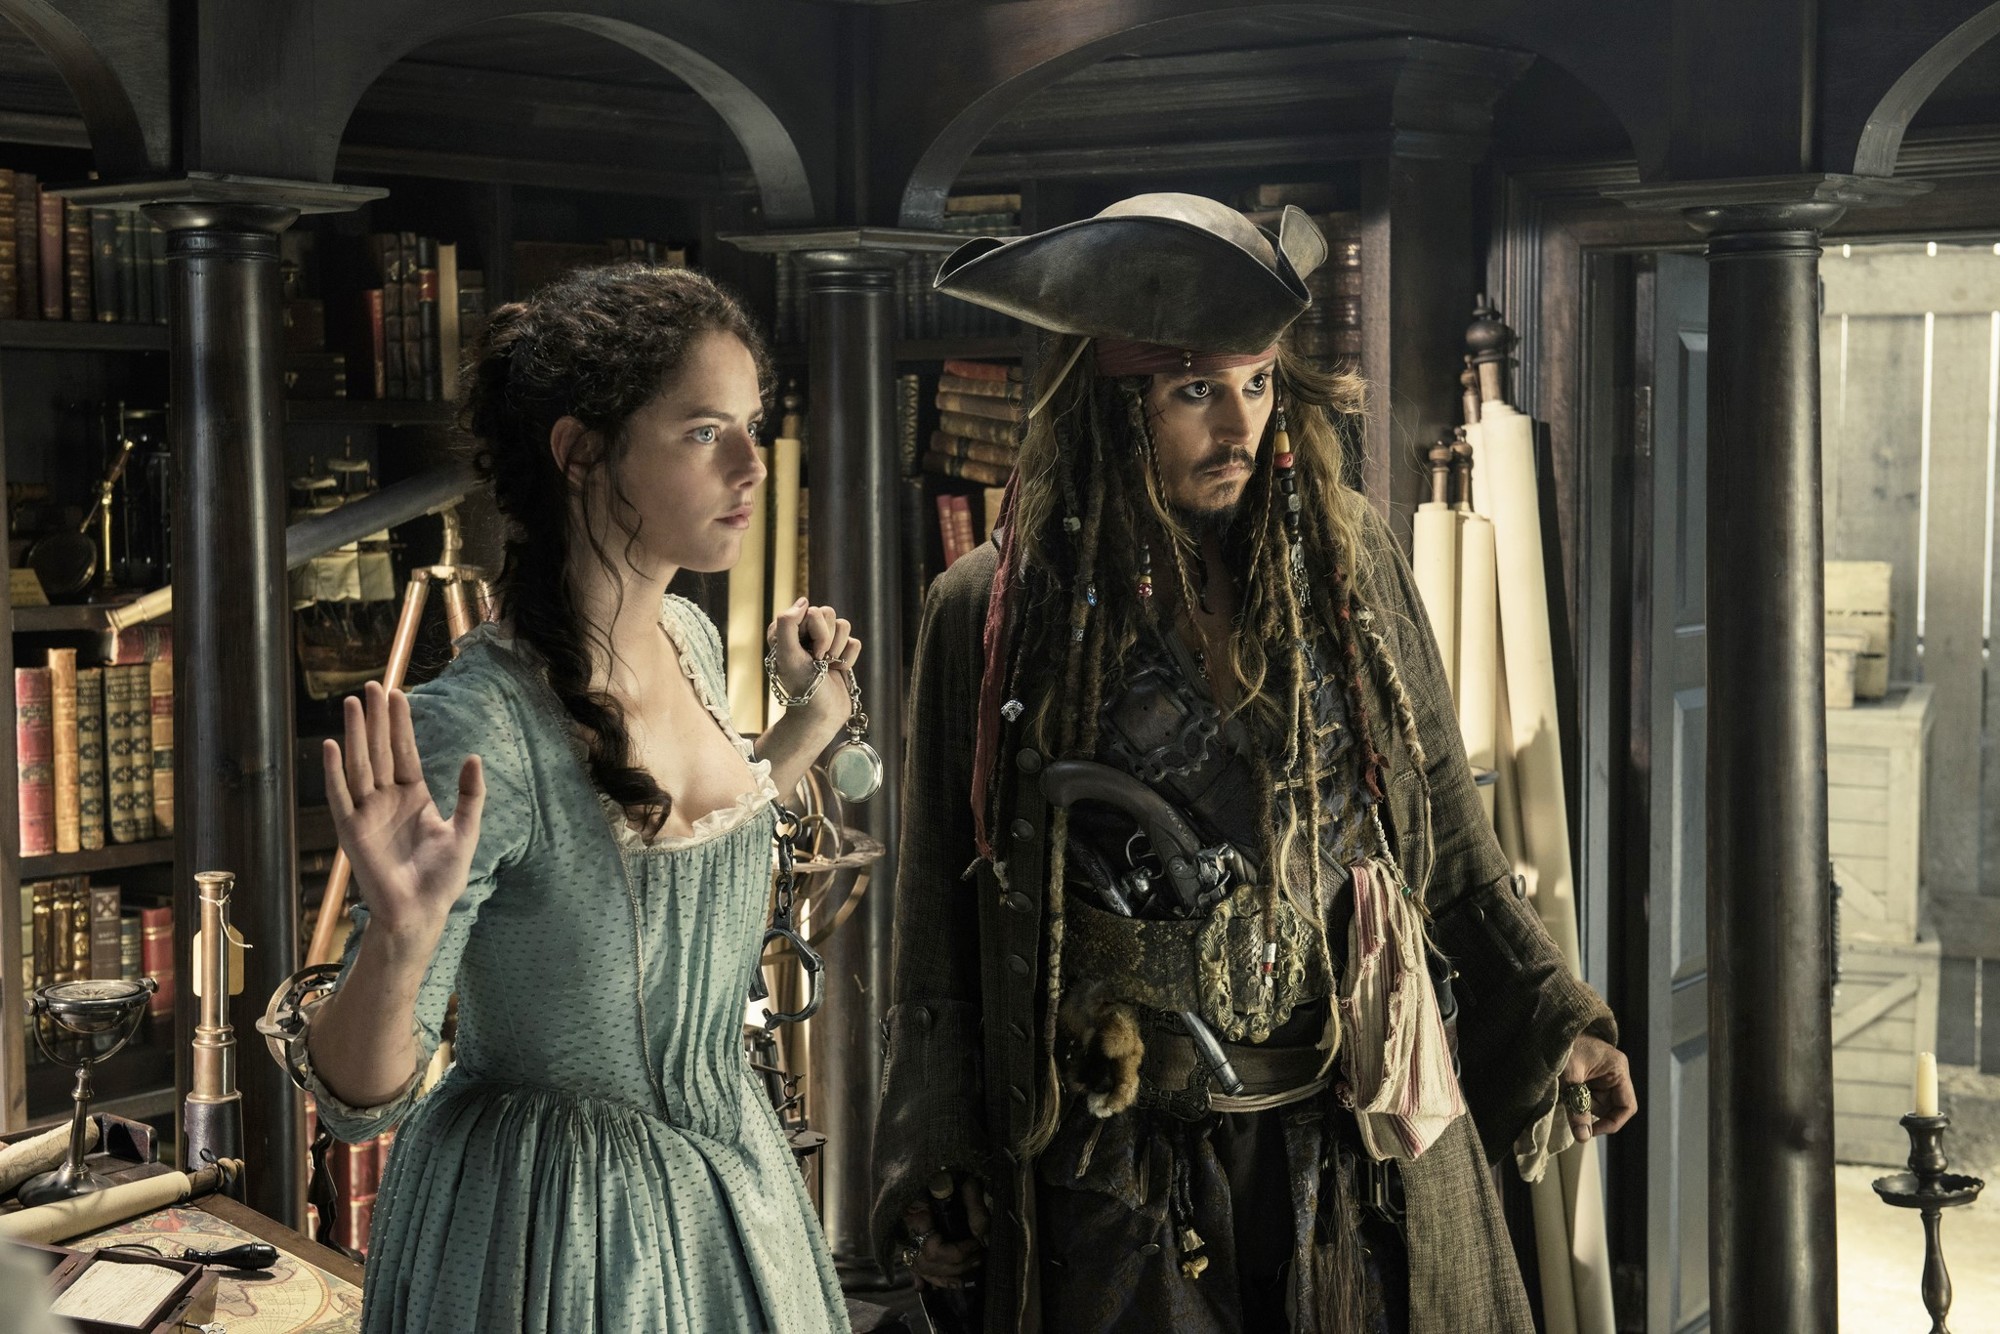 Kaya Scodelario stars as Carina Smyth and Johnny Depp stars as Captain Jack Sparrow in Walt Disney Pictures' Pirates of the Caribbean: Dead Men Tell No Tales (2017)